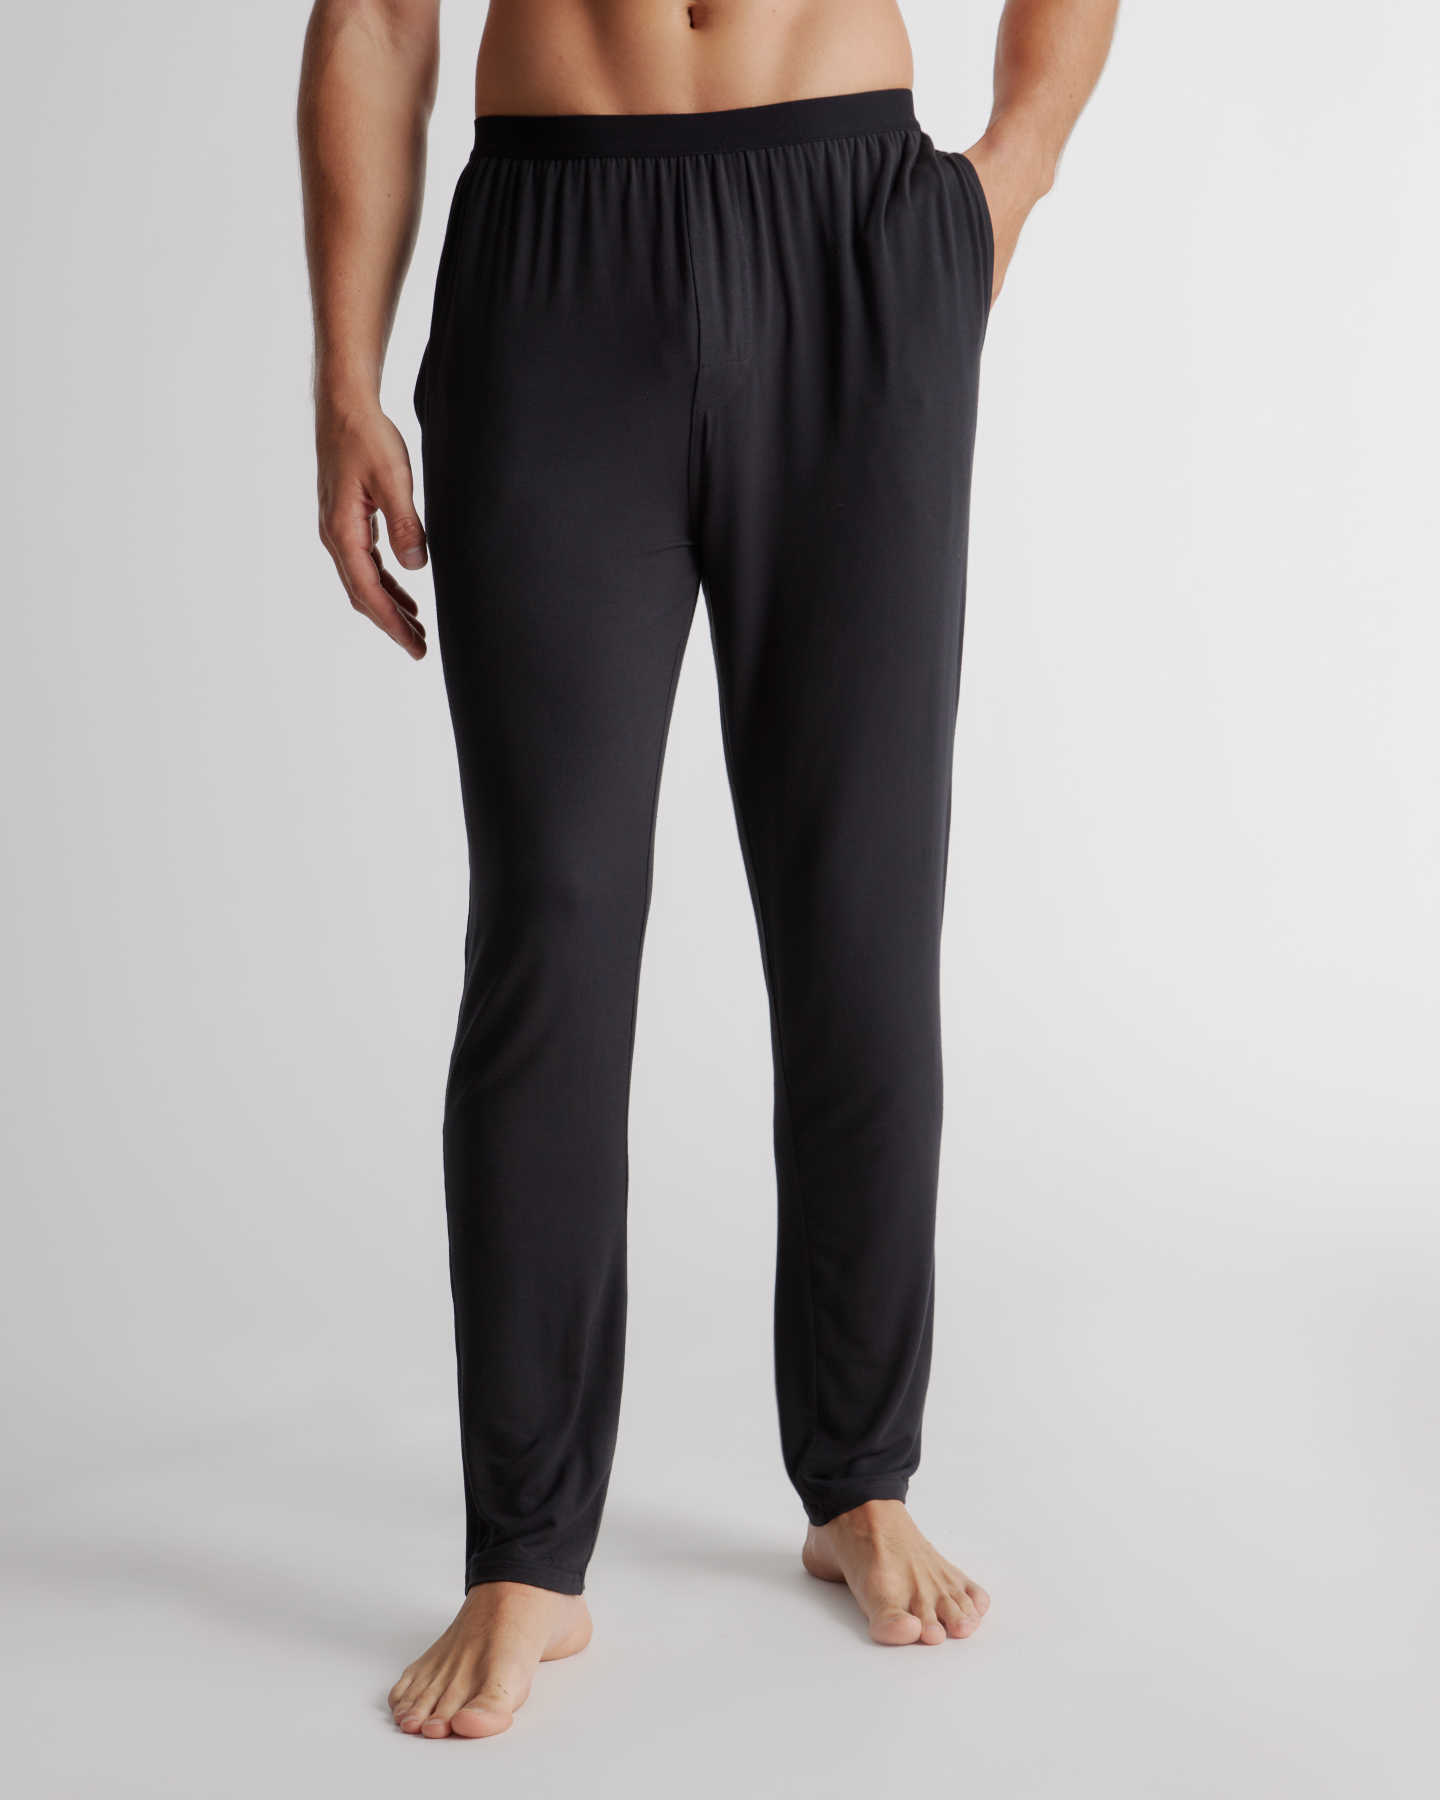 You May Also Like - Modal Jersey Lounge Pant - Black